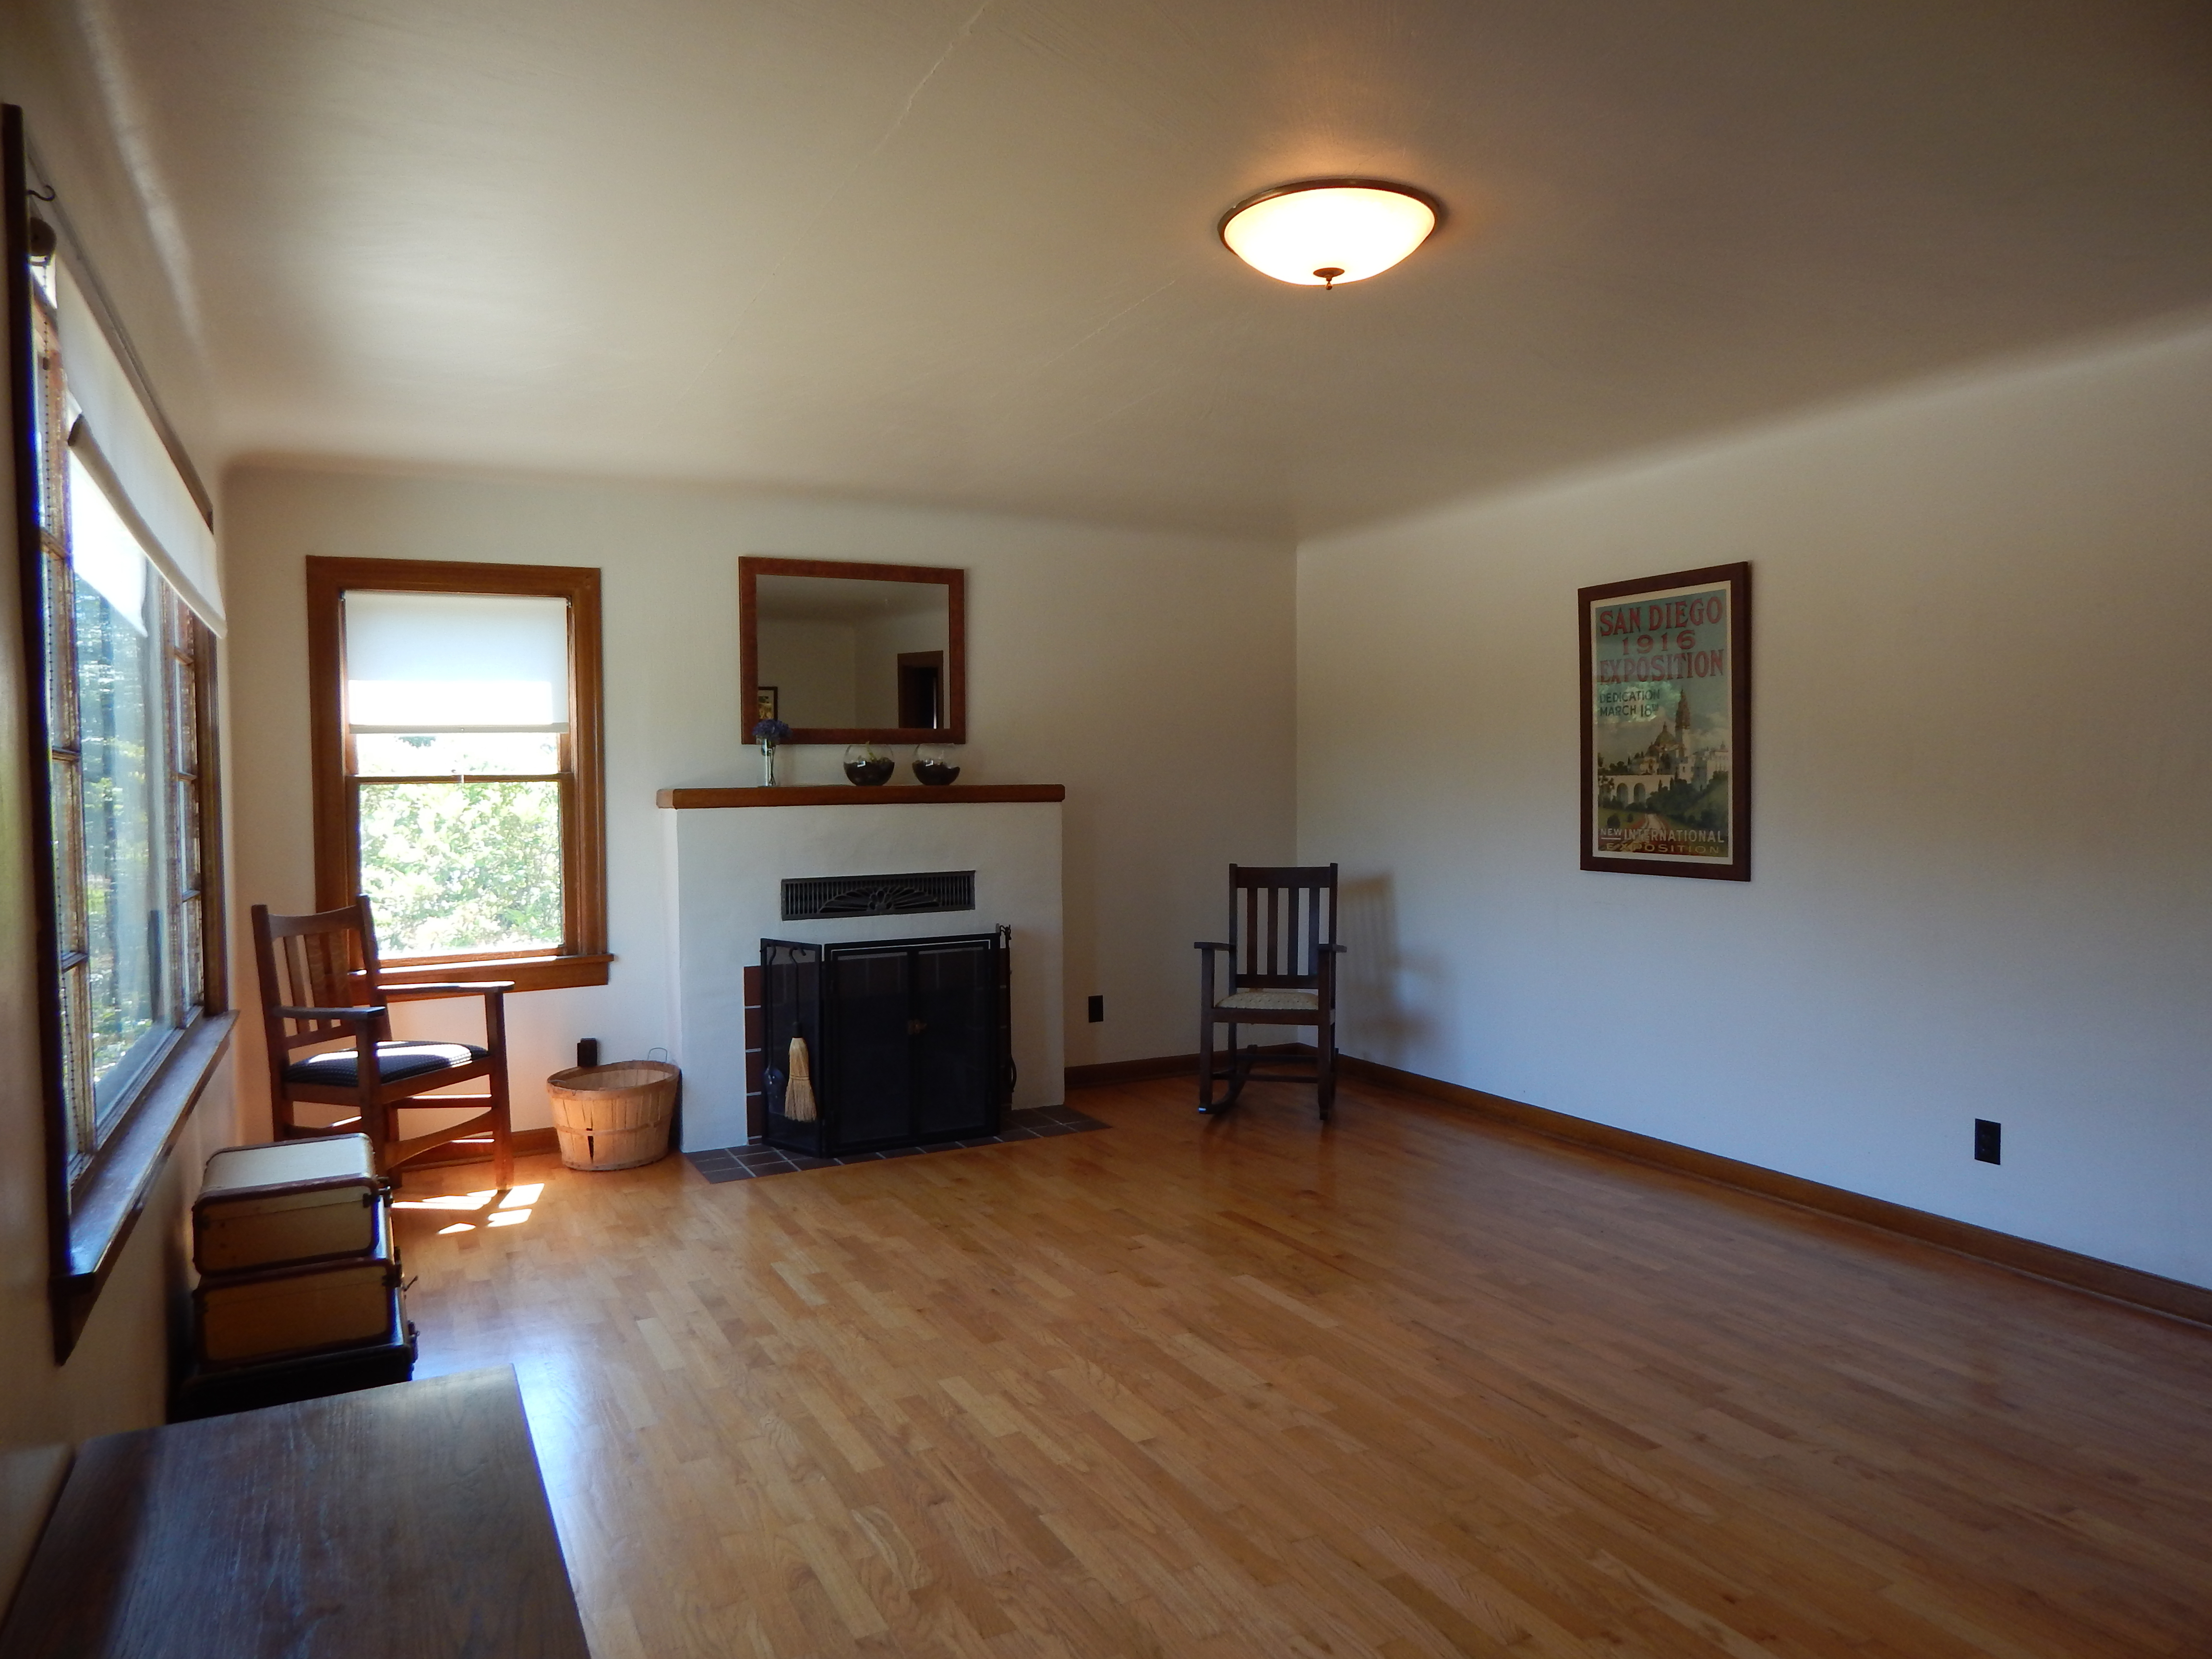 Property Photo: Interior of home 1111 Chester Ave  WA 98337 